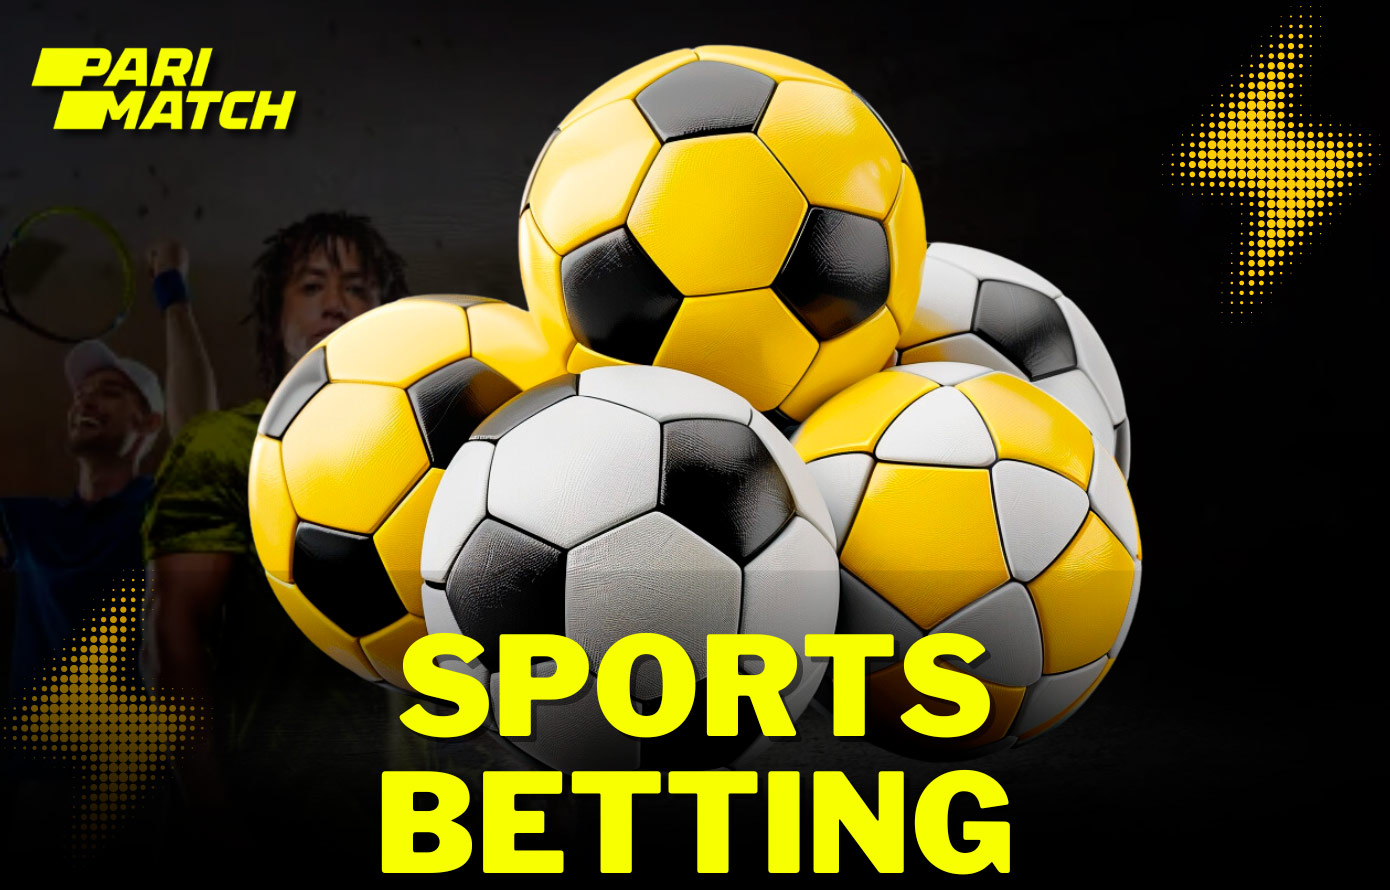 The Parimatch platform offers a wide selection of sports